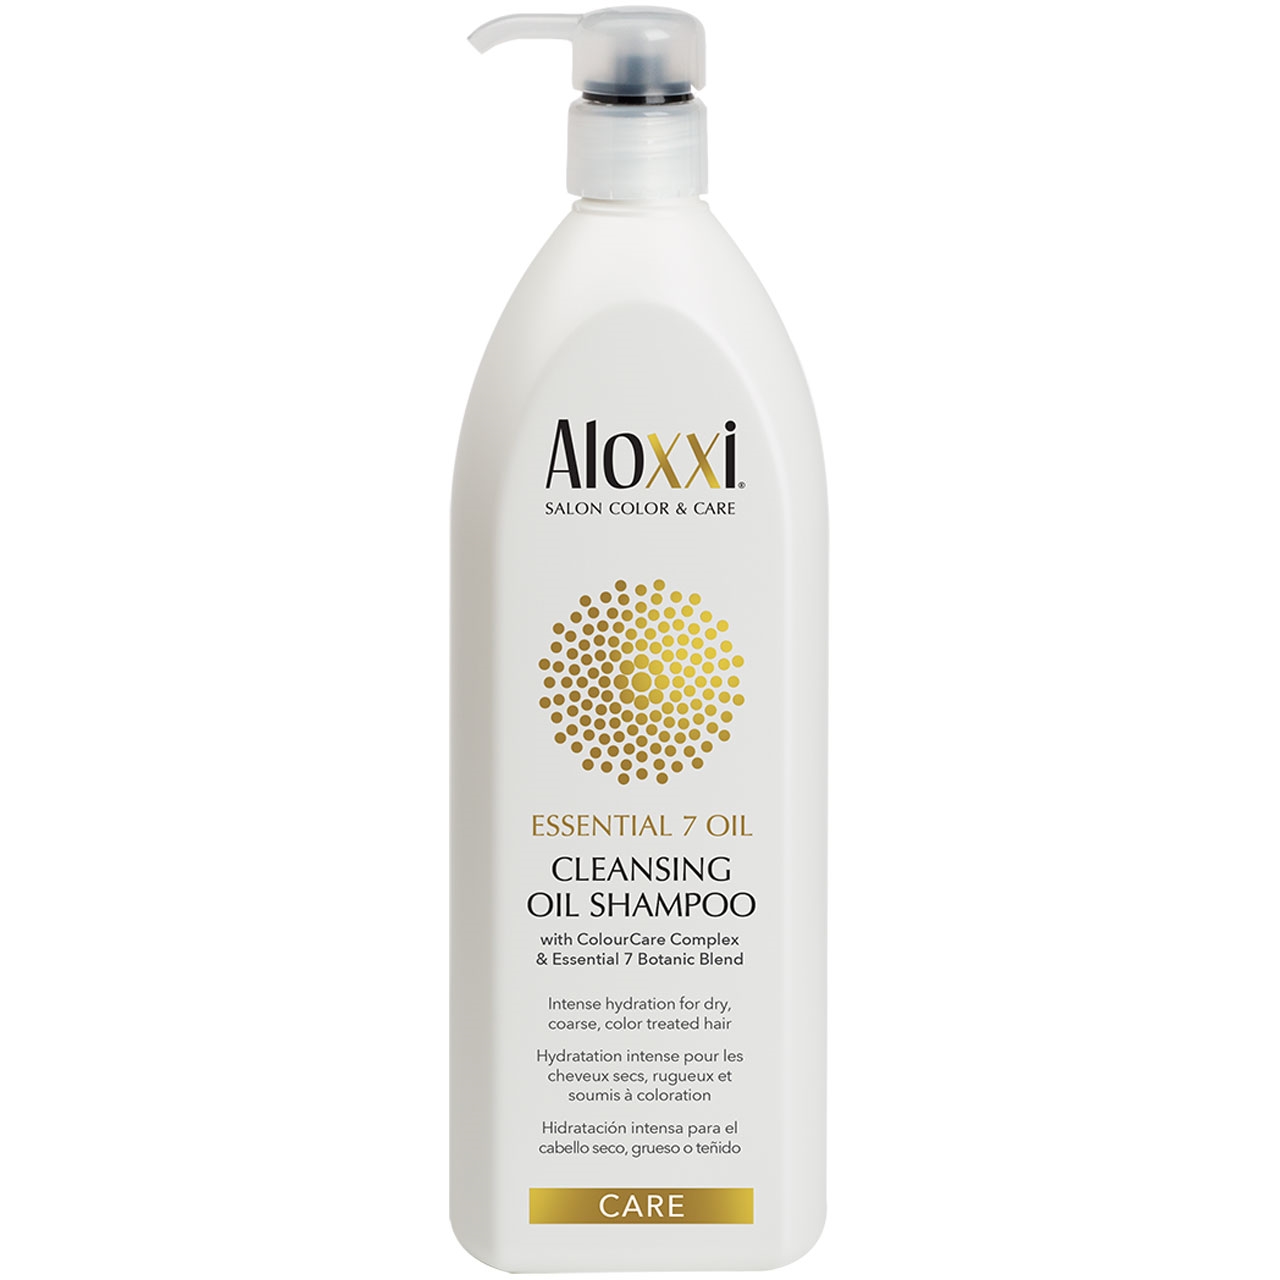 Aloxxi Cleansing Oil Shampoo Liter